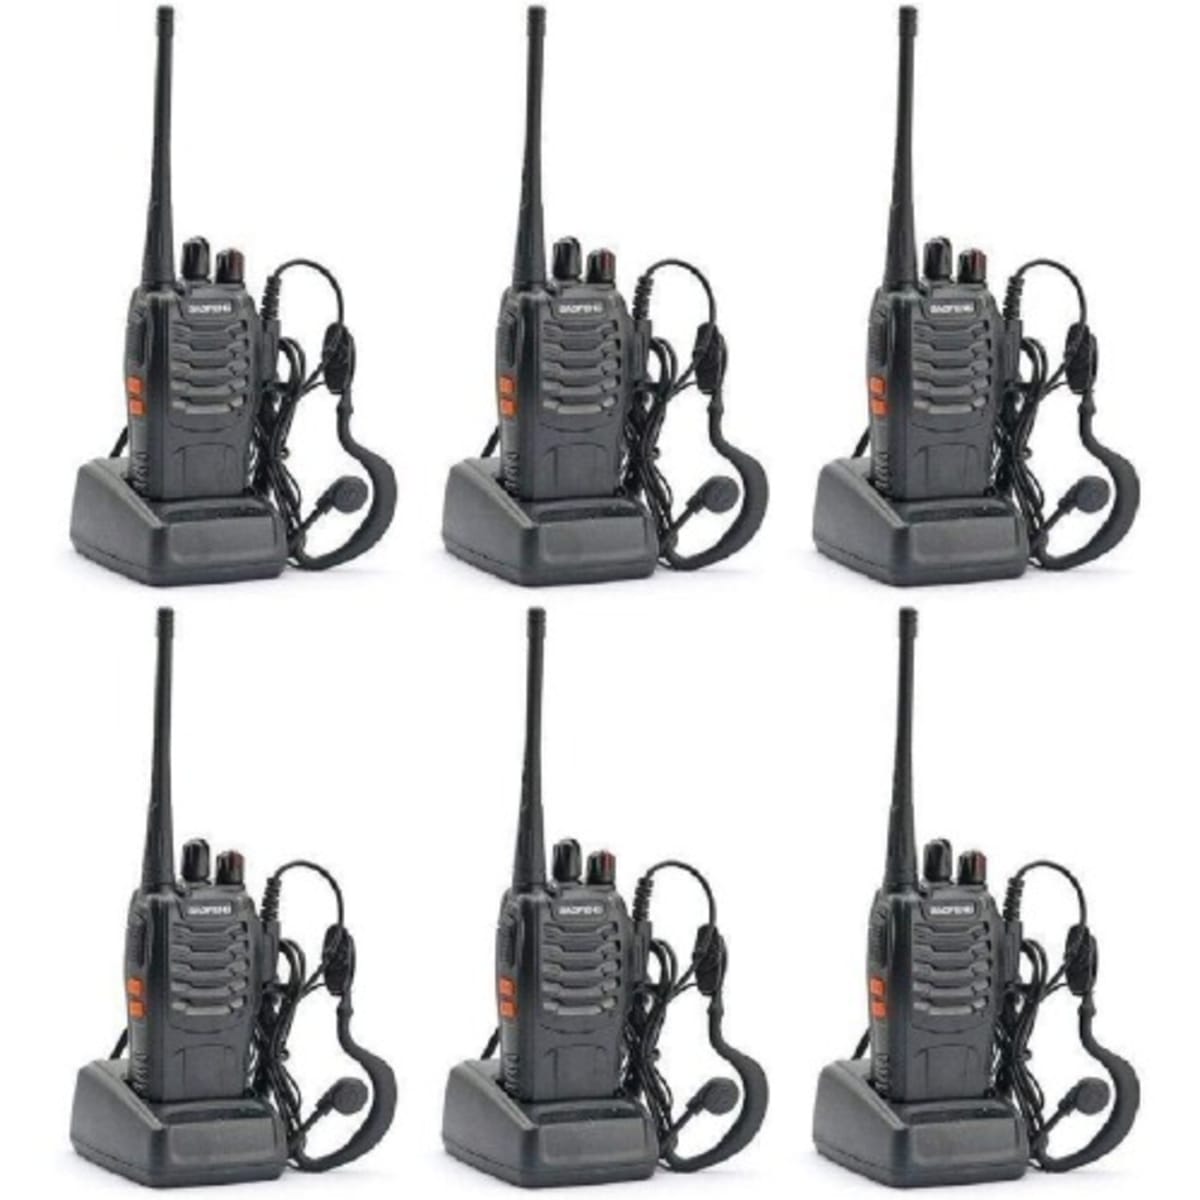 Baofeng Bf-888s Two Way Radio Pack Of 6pcs Radios Customize Package  Konga Online Shopping